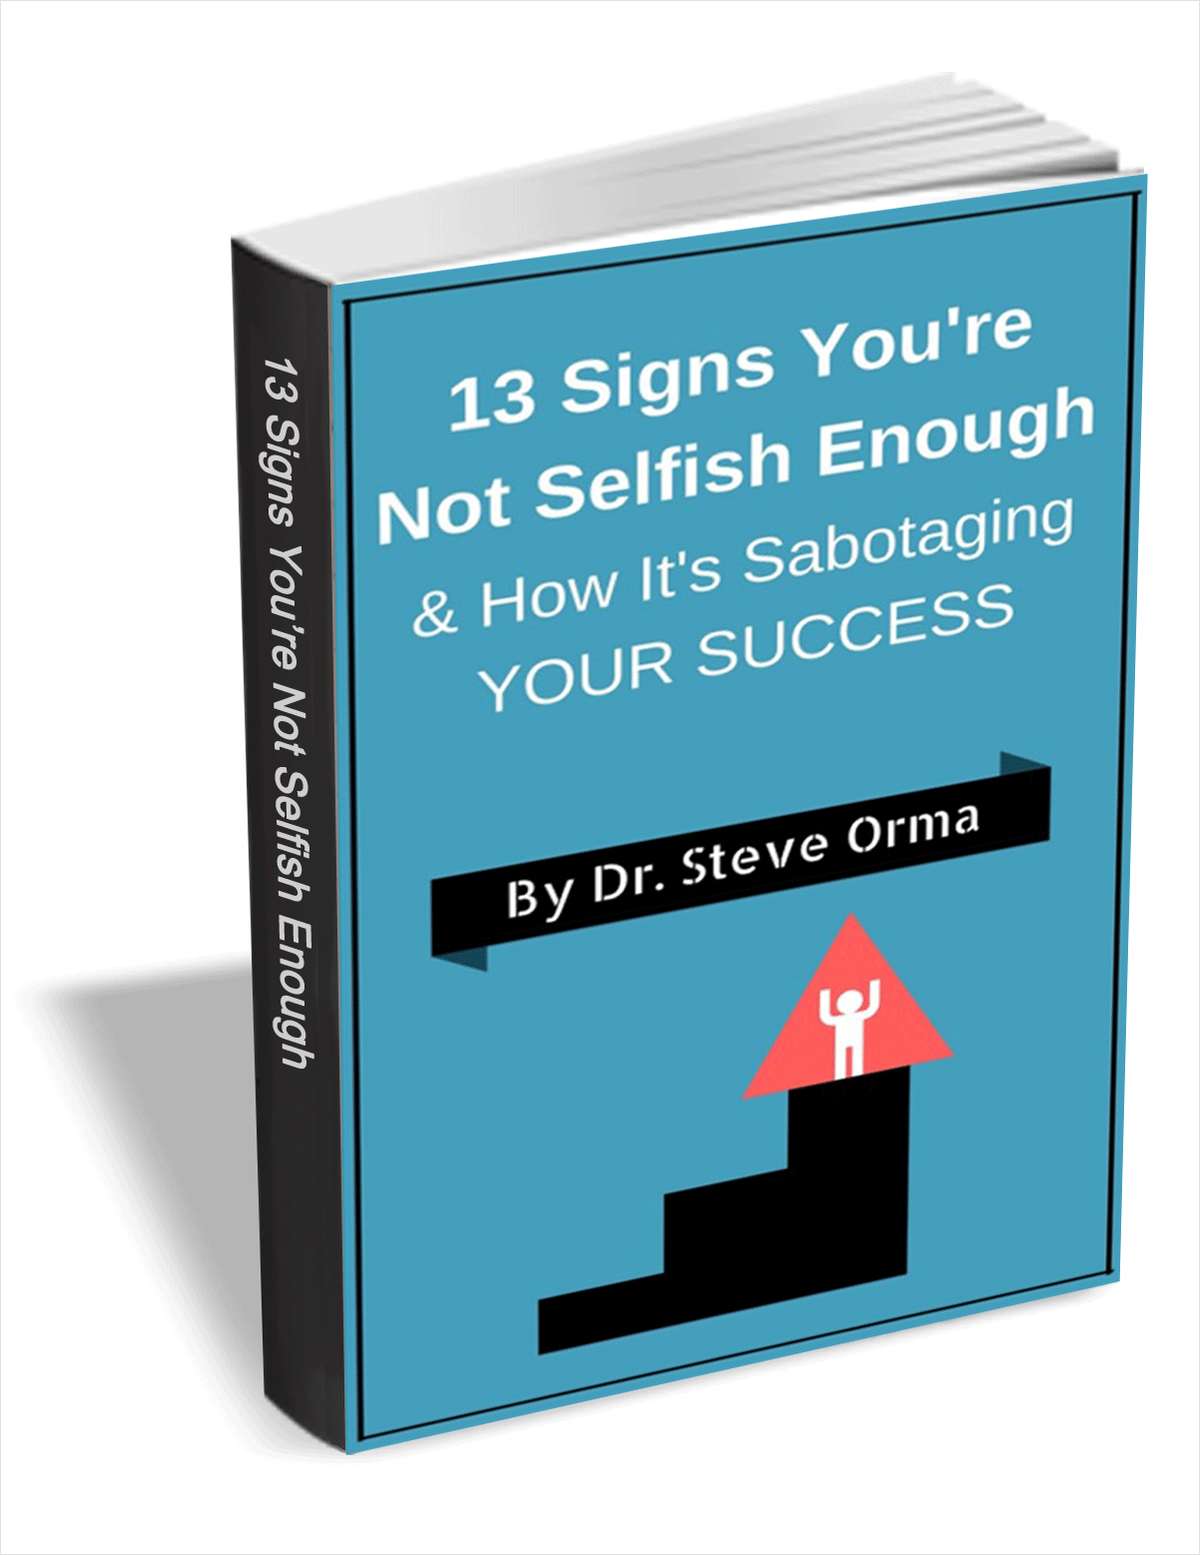 13 Signs You're Not Selfish Enough & How It's Sabotaging Your Success